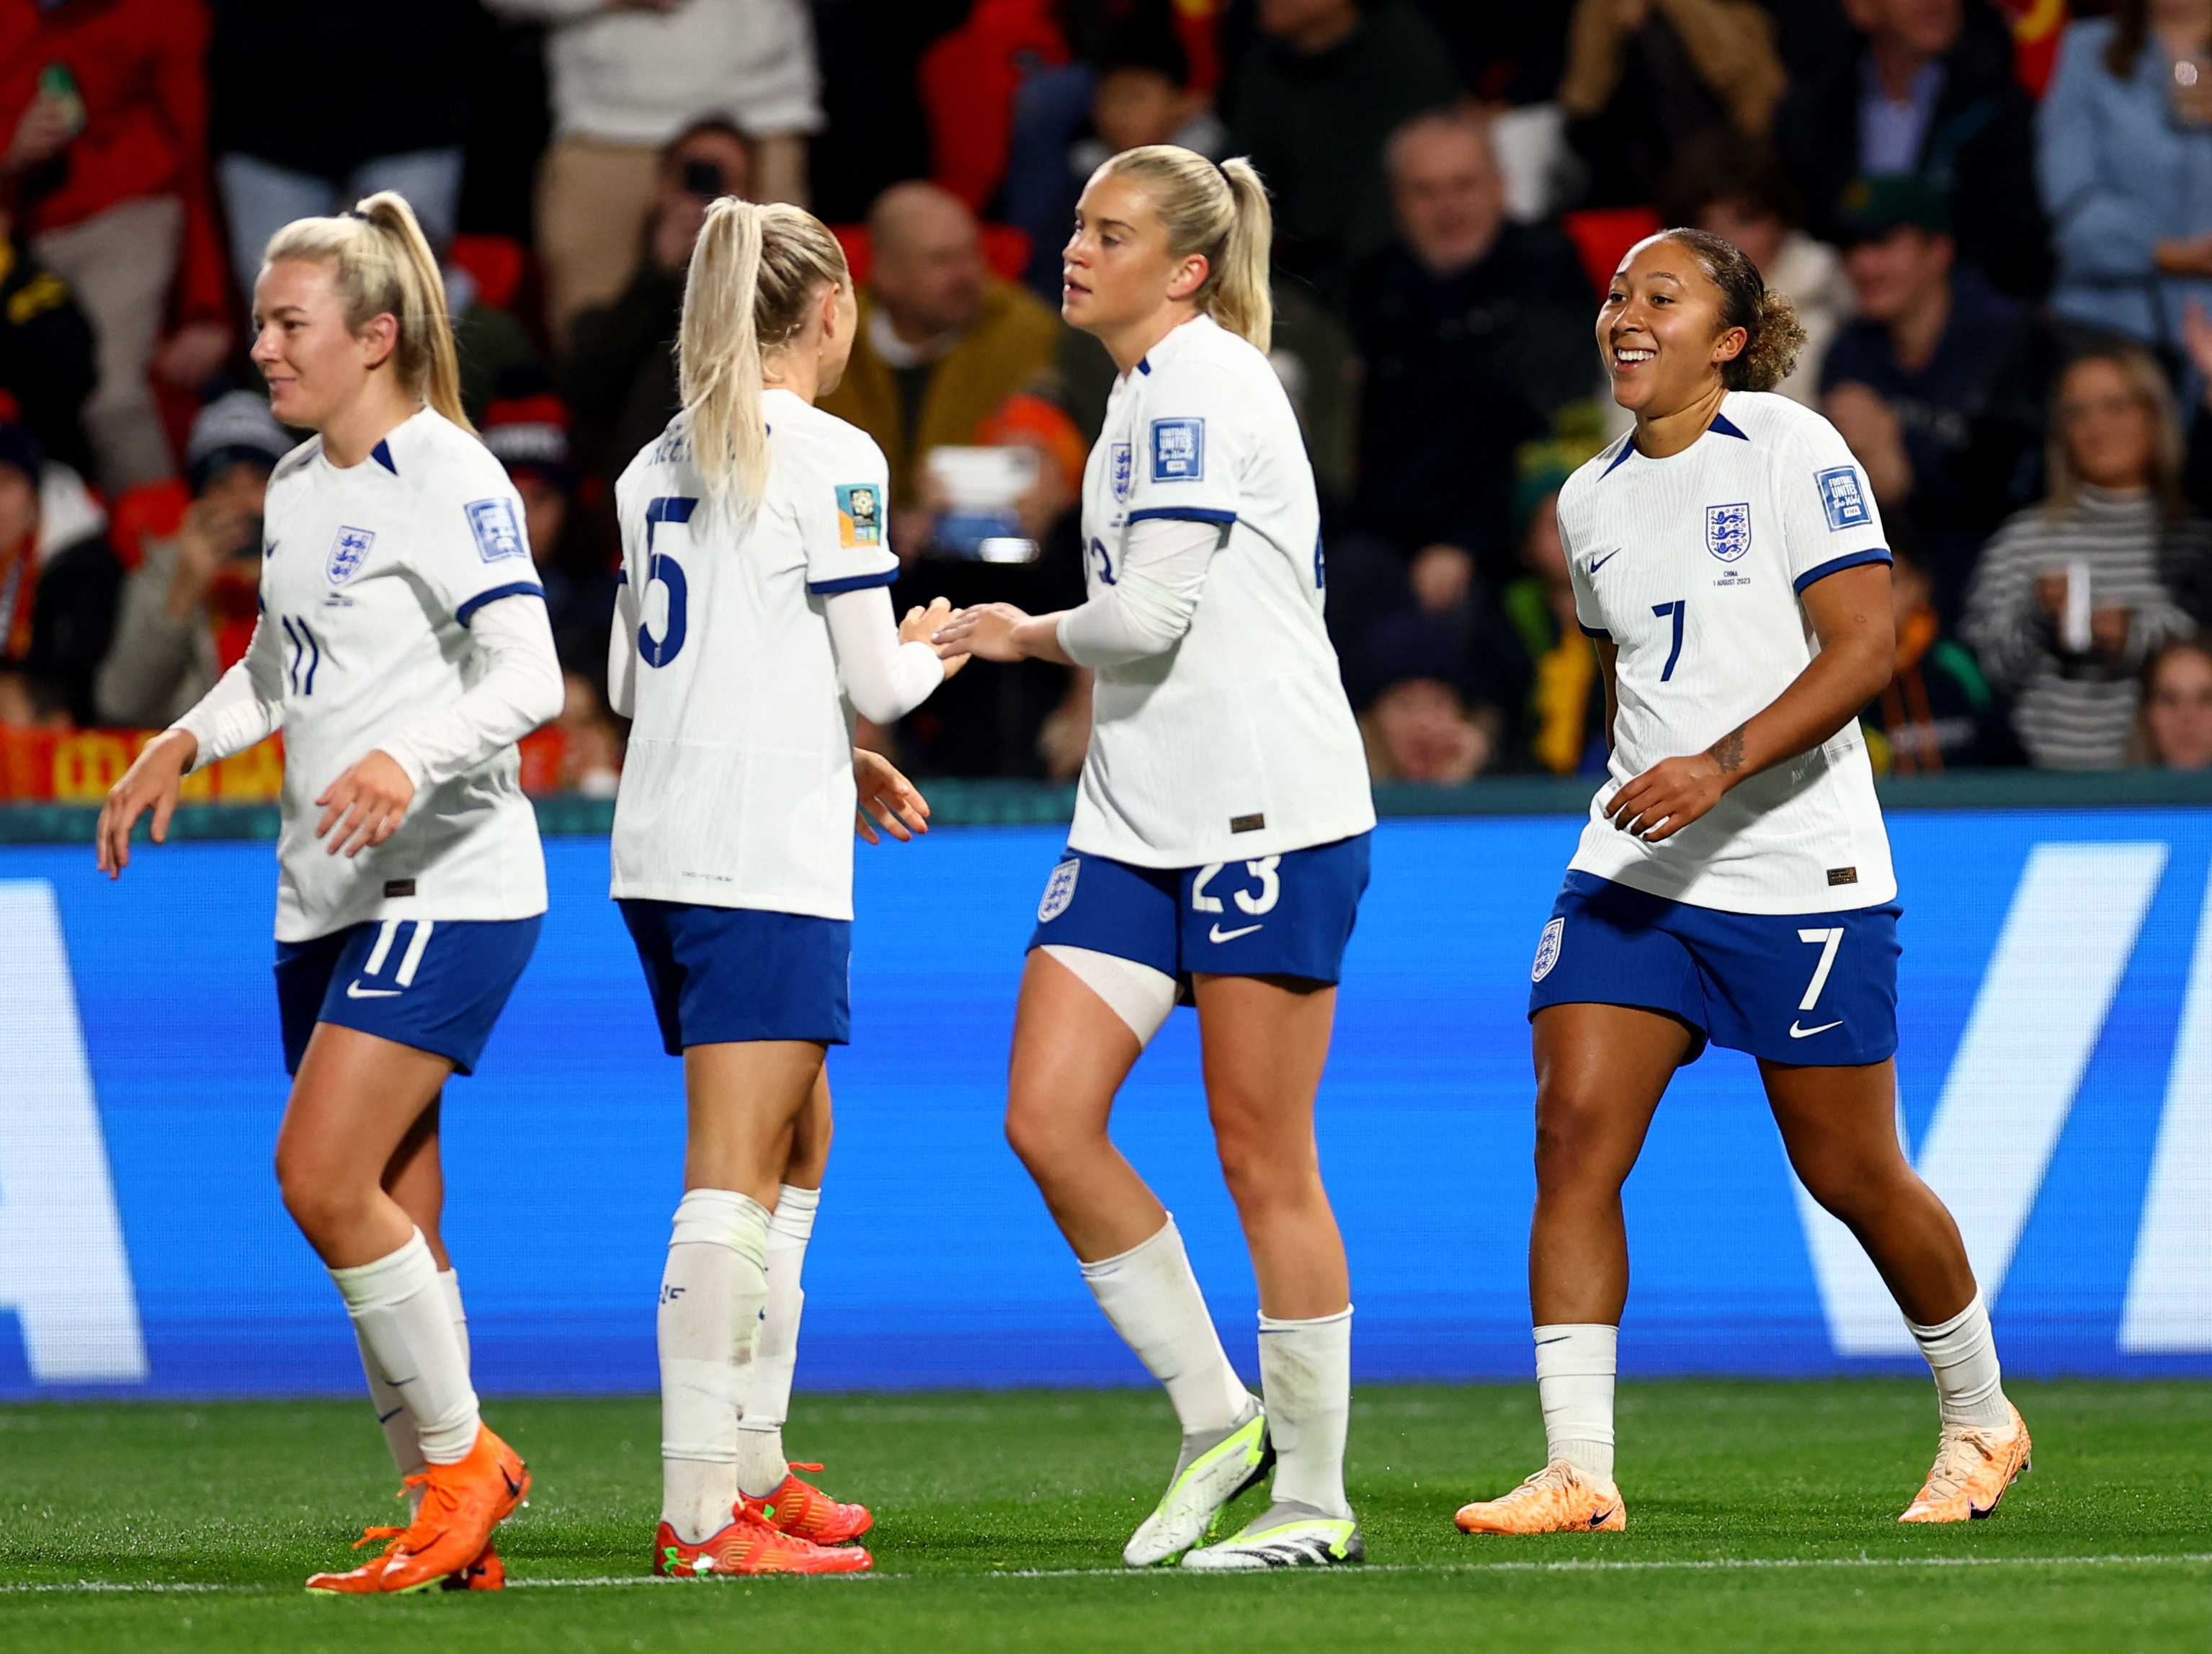 England smash China for six to ease into last 16 as group winners Reuters